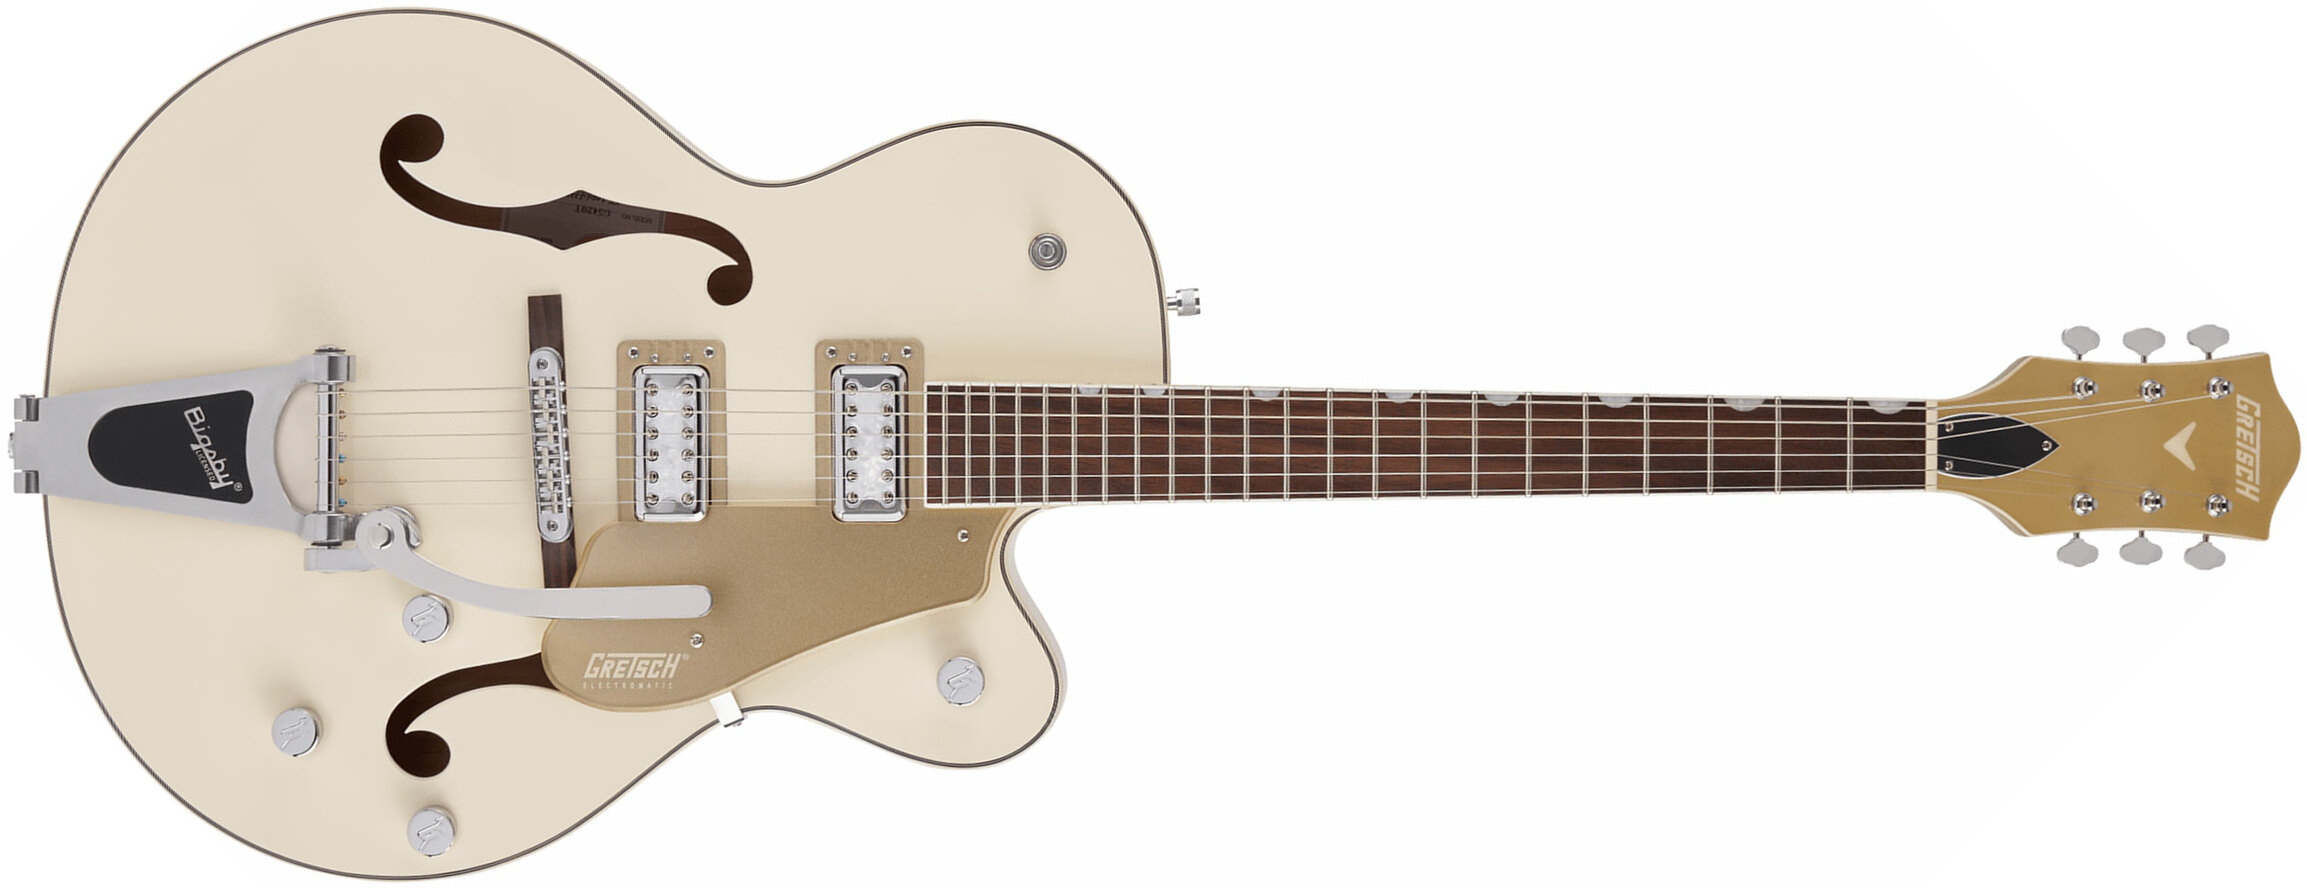 Gretsch G5410t Tri-five Electromatic Hollow Hh Bigsby Rw - Two-tone Vintage White/casino Gold - Guitare Électrique 1/2 Caisse - Main picture